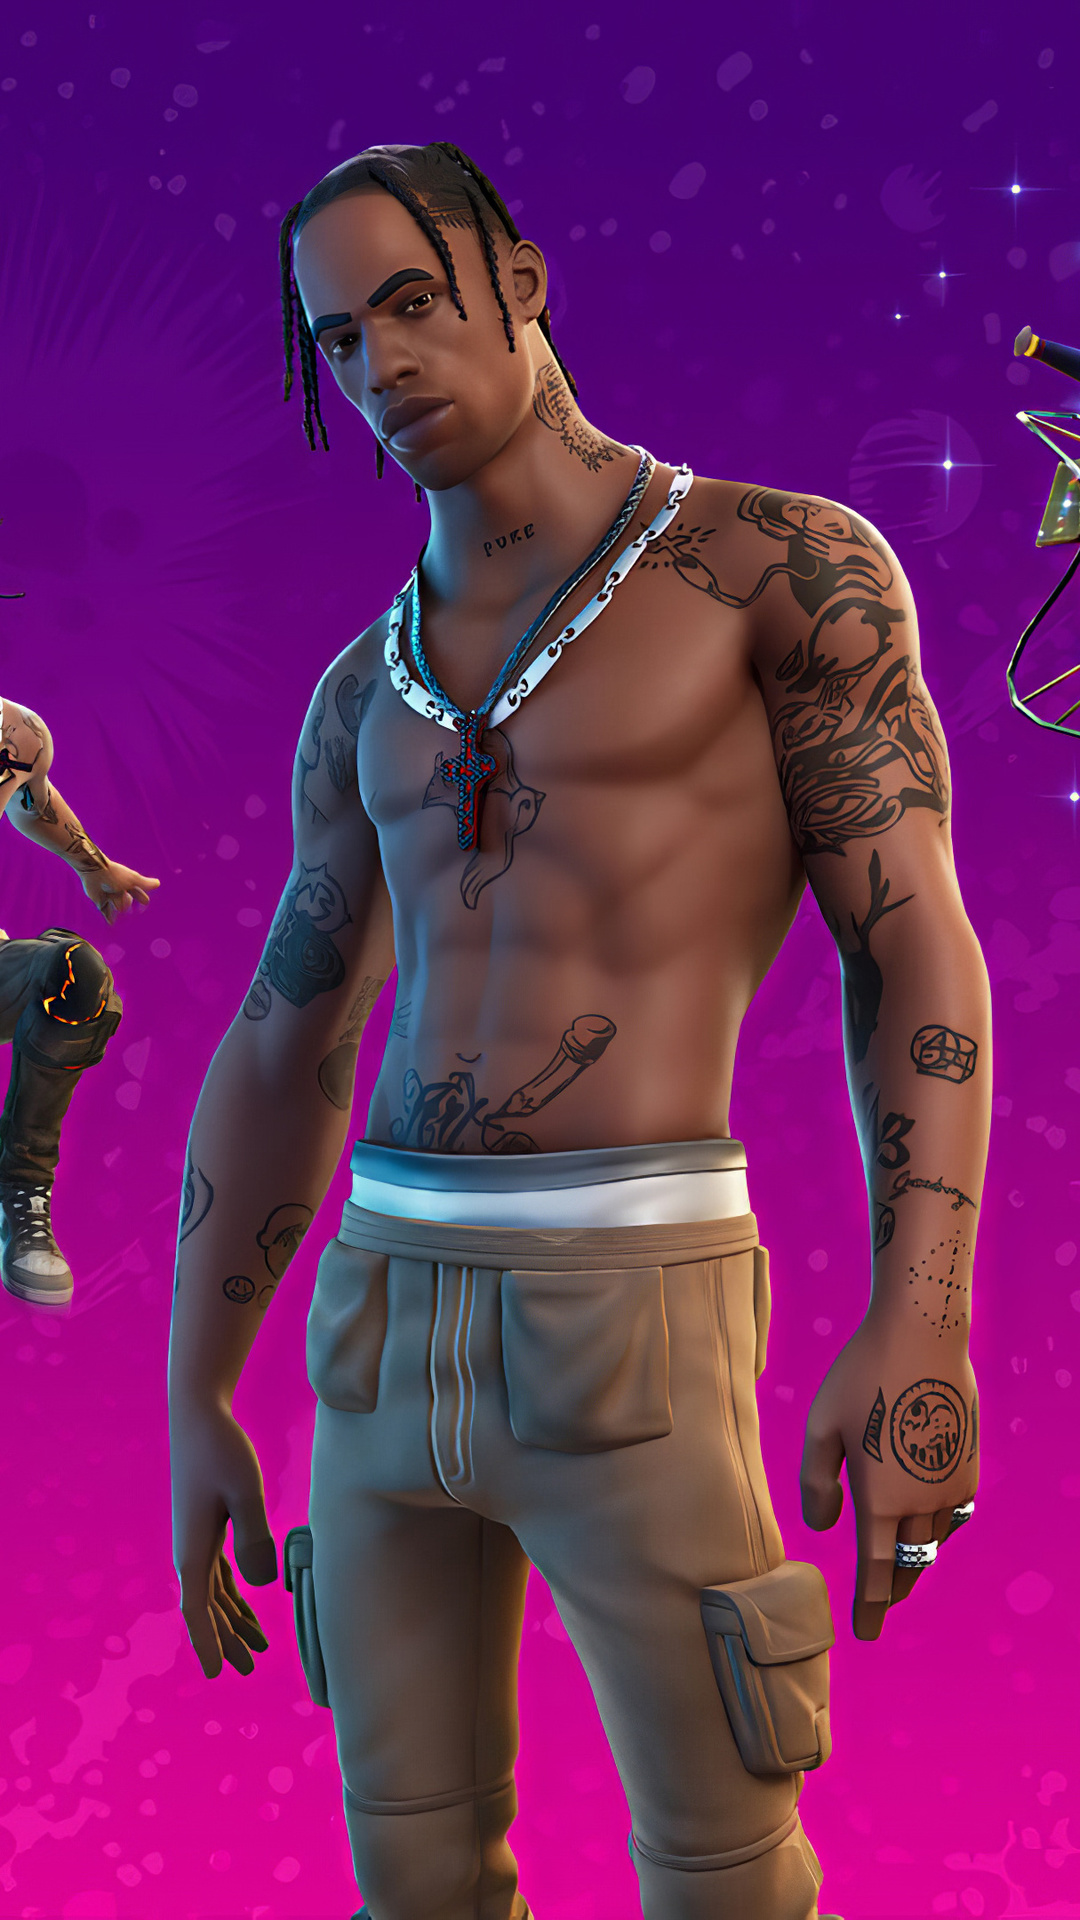 Fortnite Travis Scott Wallpaper - Free Wallpapers for Apple iPhone And ...